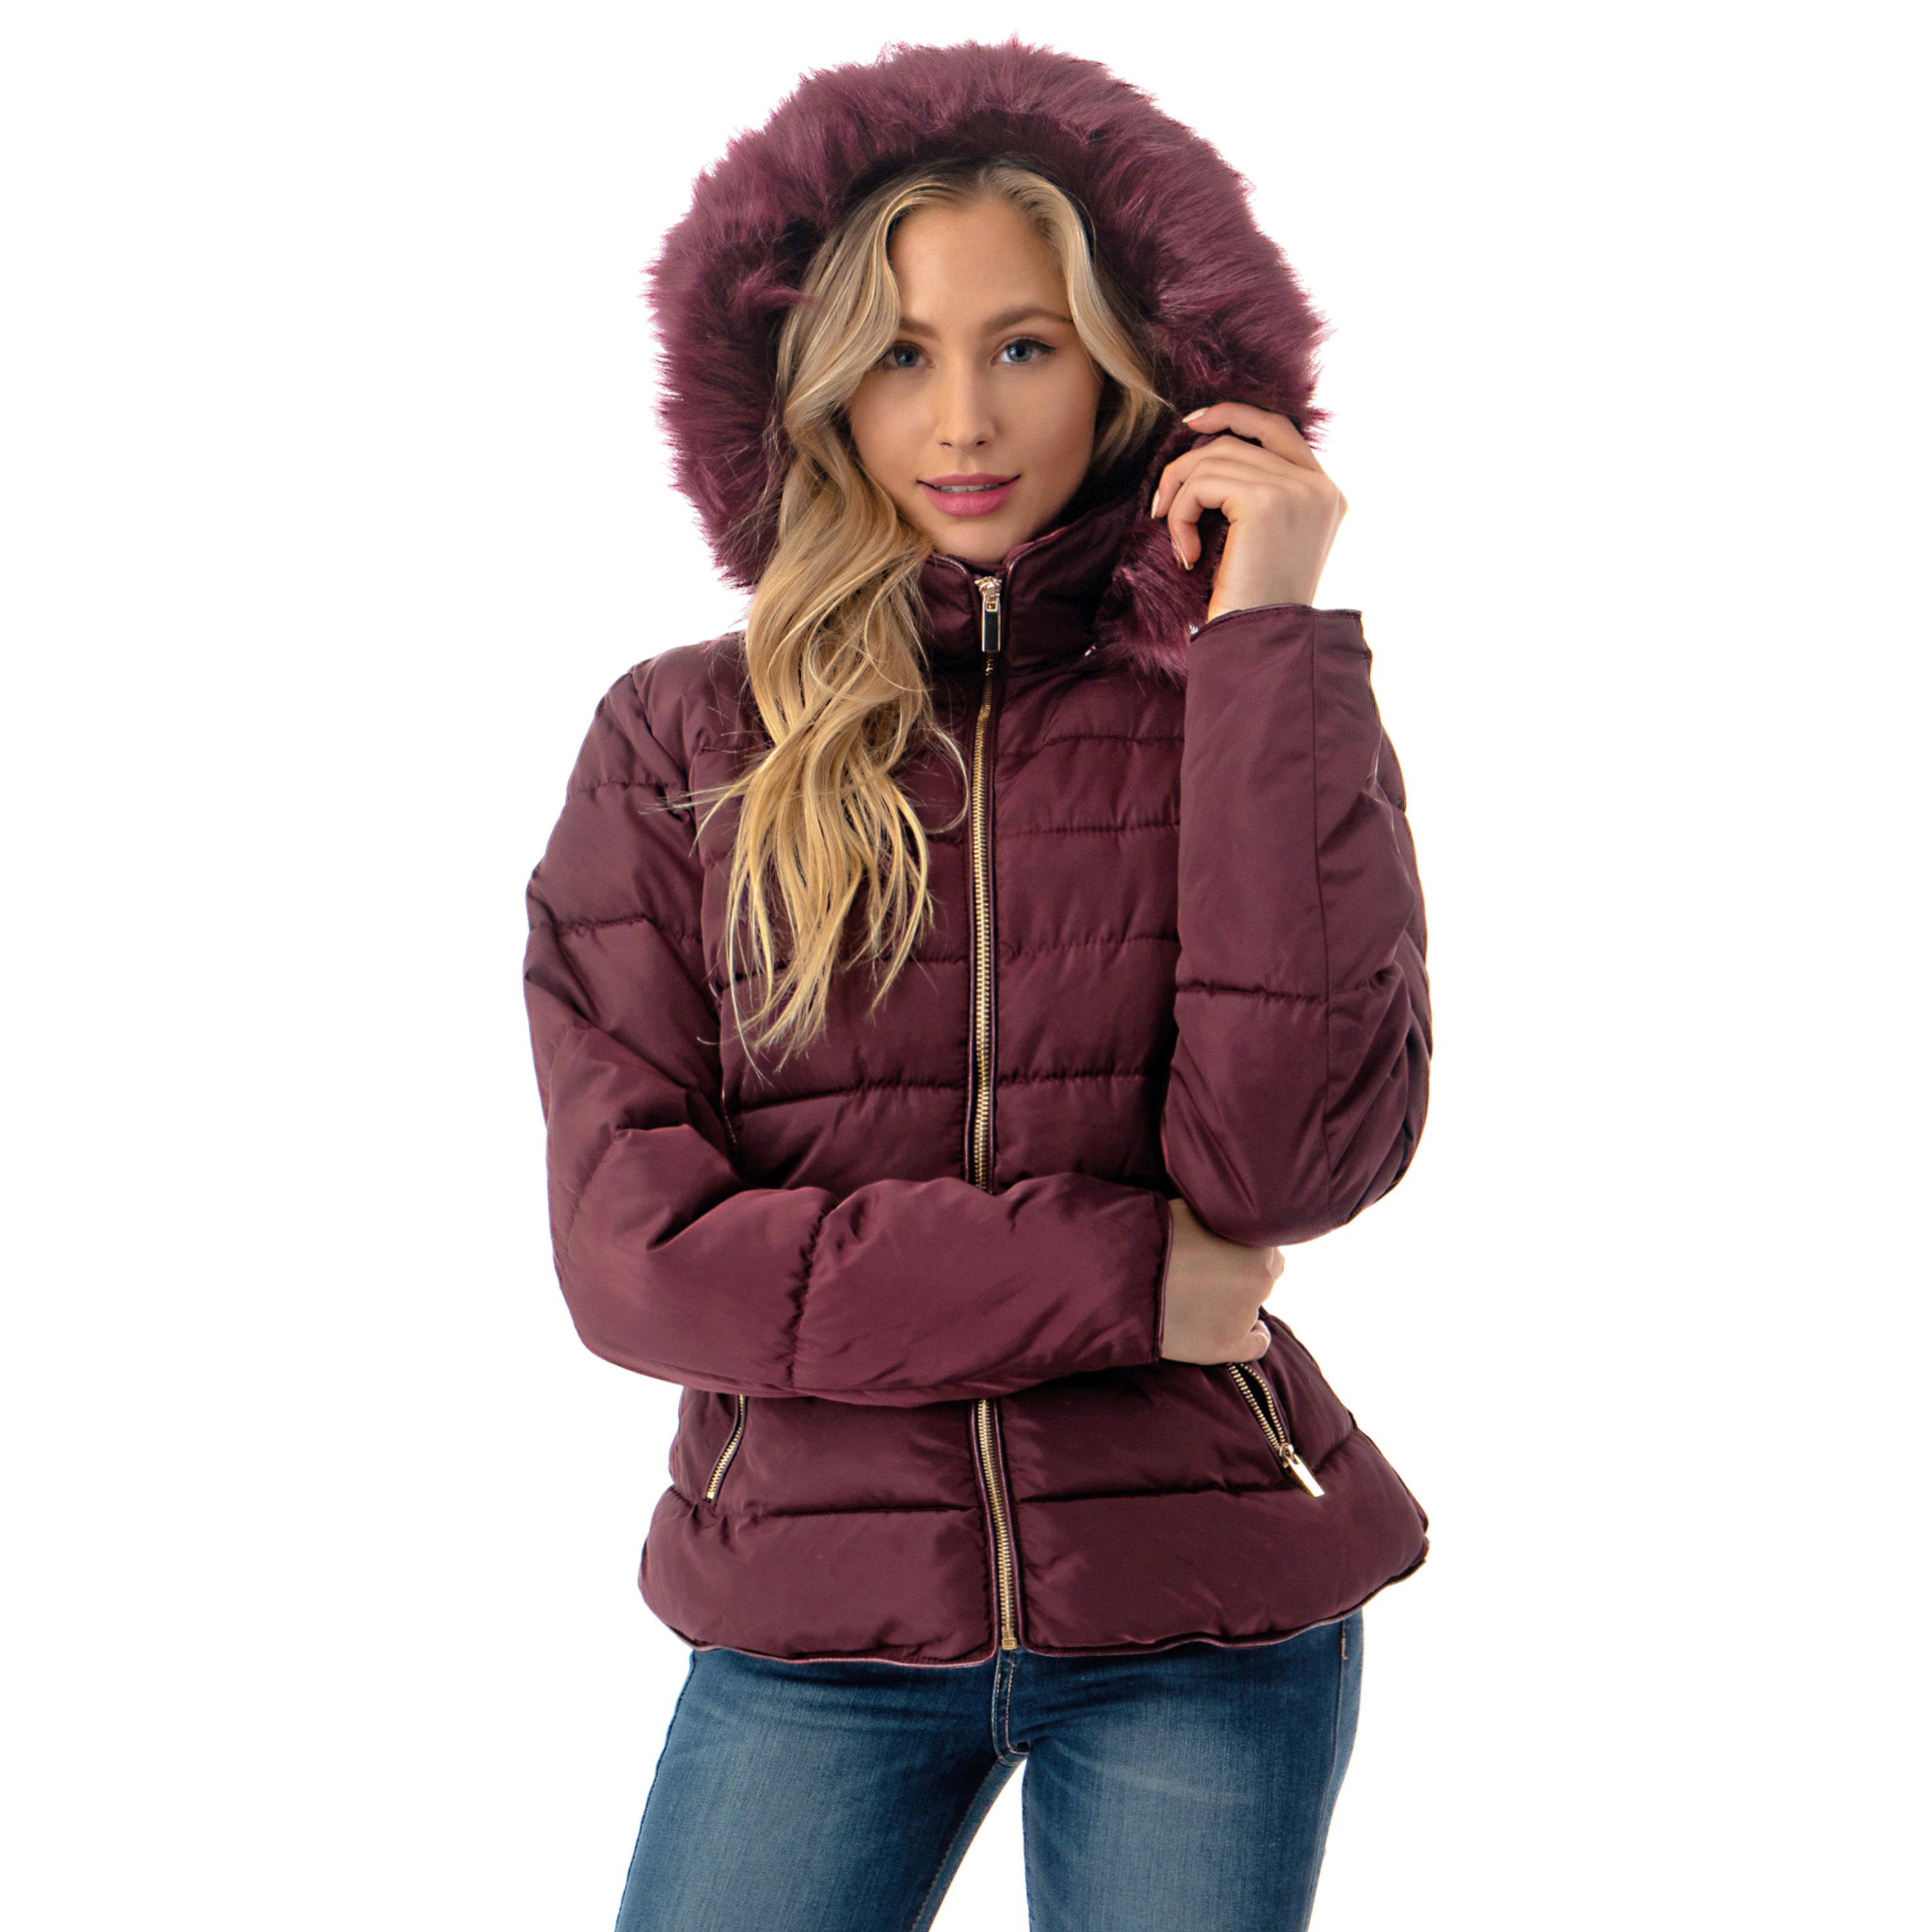 Fashionazzle Women's Short Puffer Coat with Removable Faux Fur Trim Hood Jacket - image 3 of 14